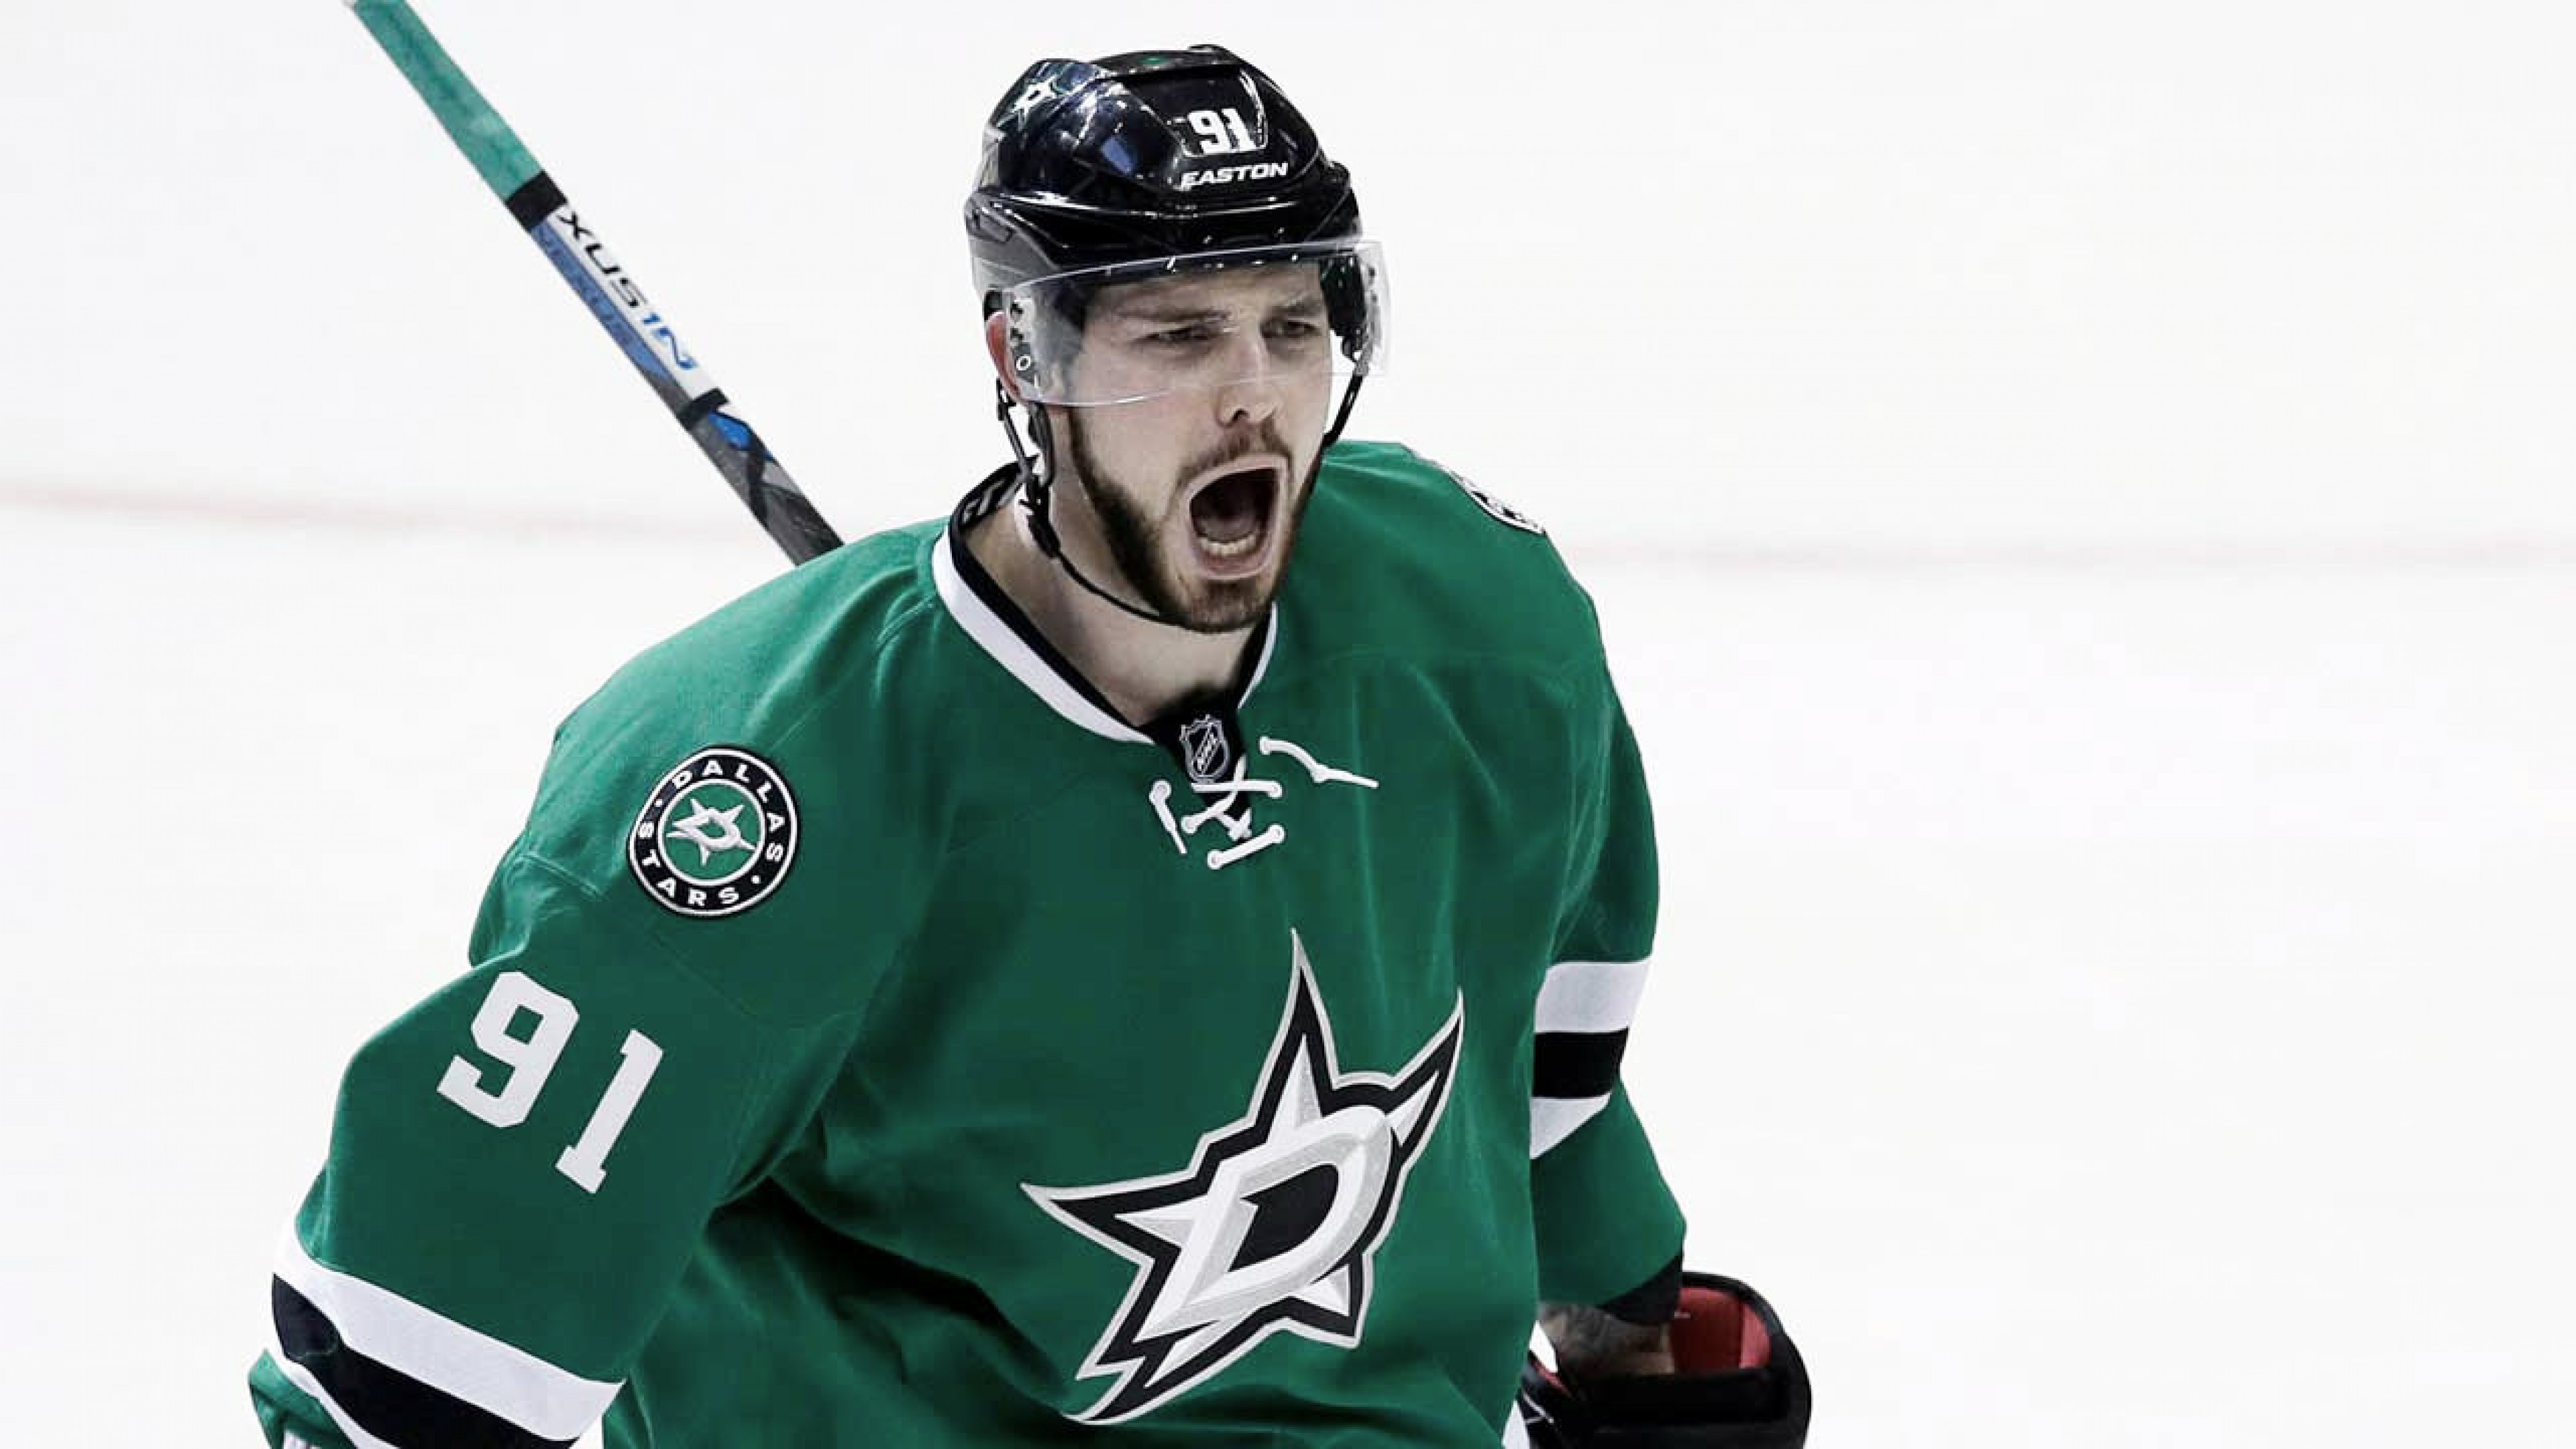 Tyler Seguin dilemma: Does he stay or does he go?